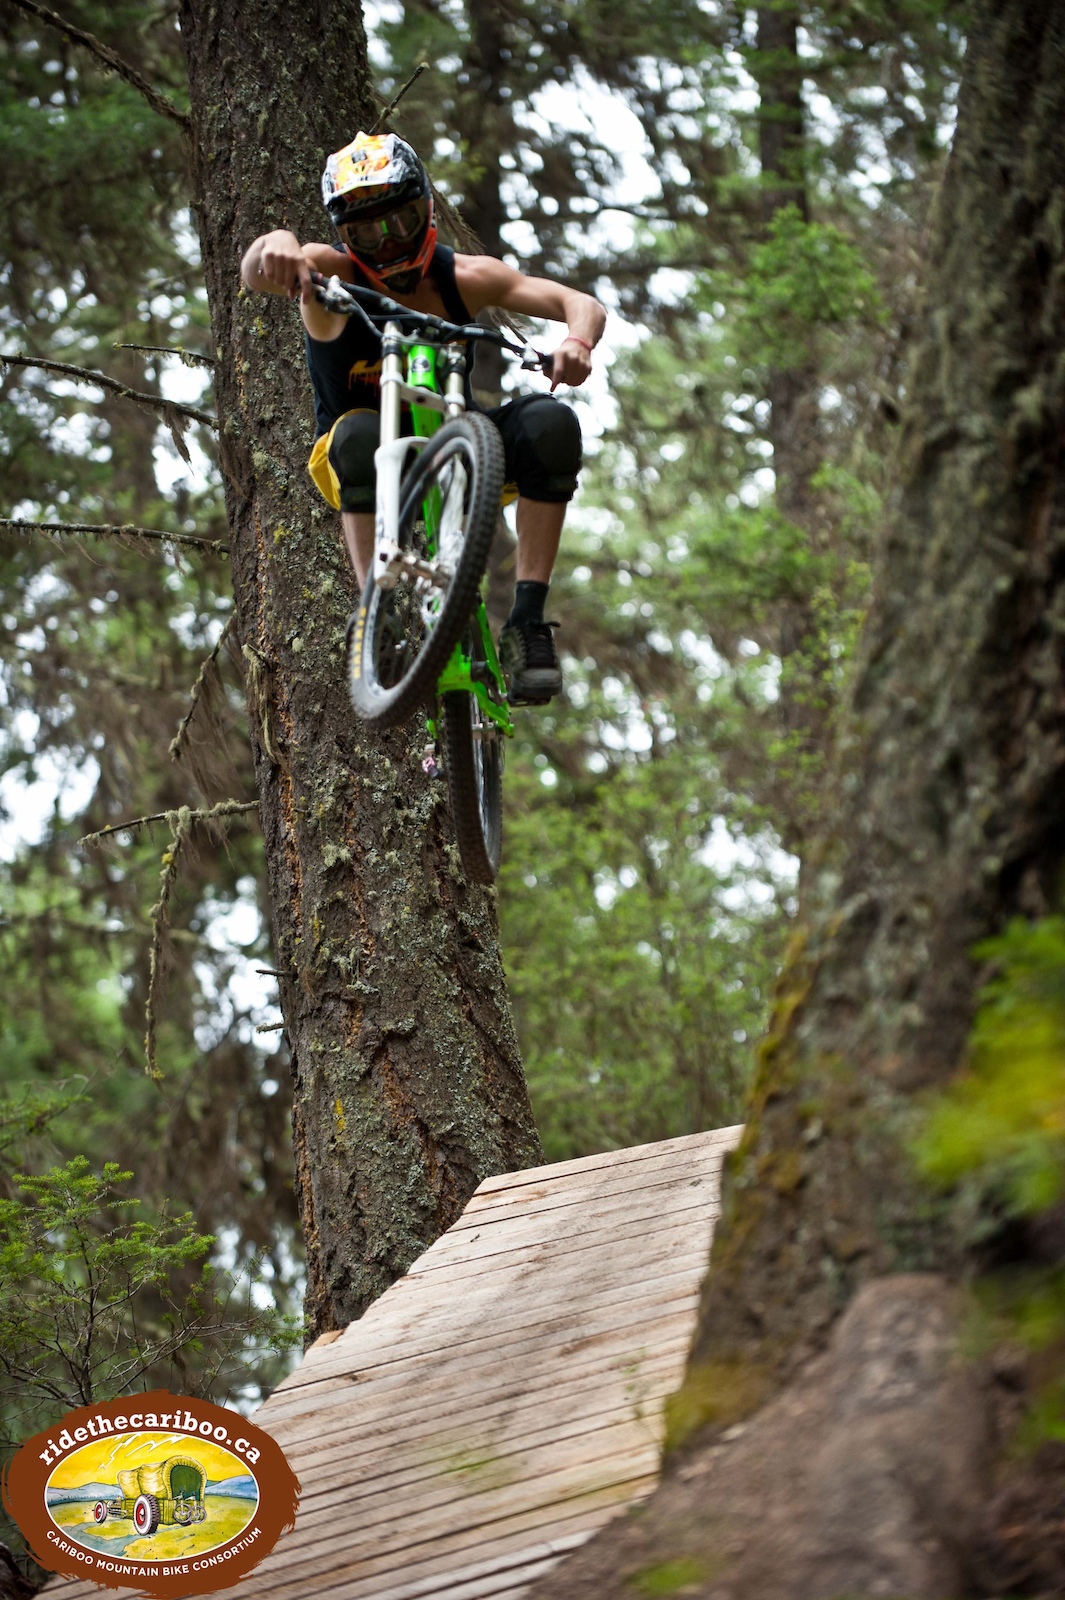 For more information on Snakes and Ladders and riding in the Cariboo Region of BC, check ridethecariboo.ca